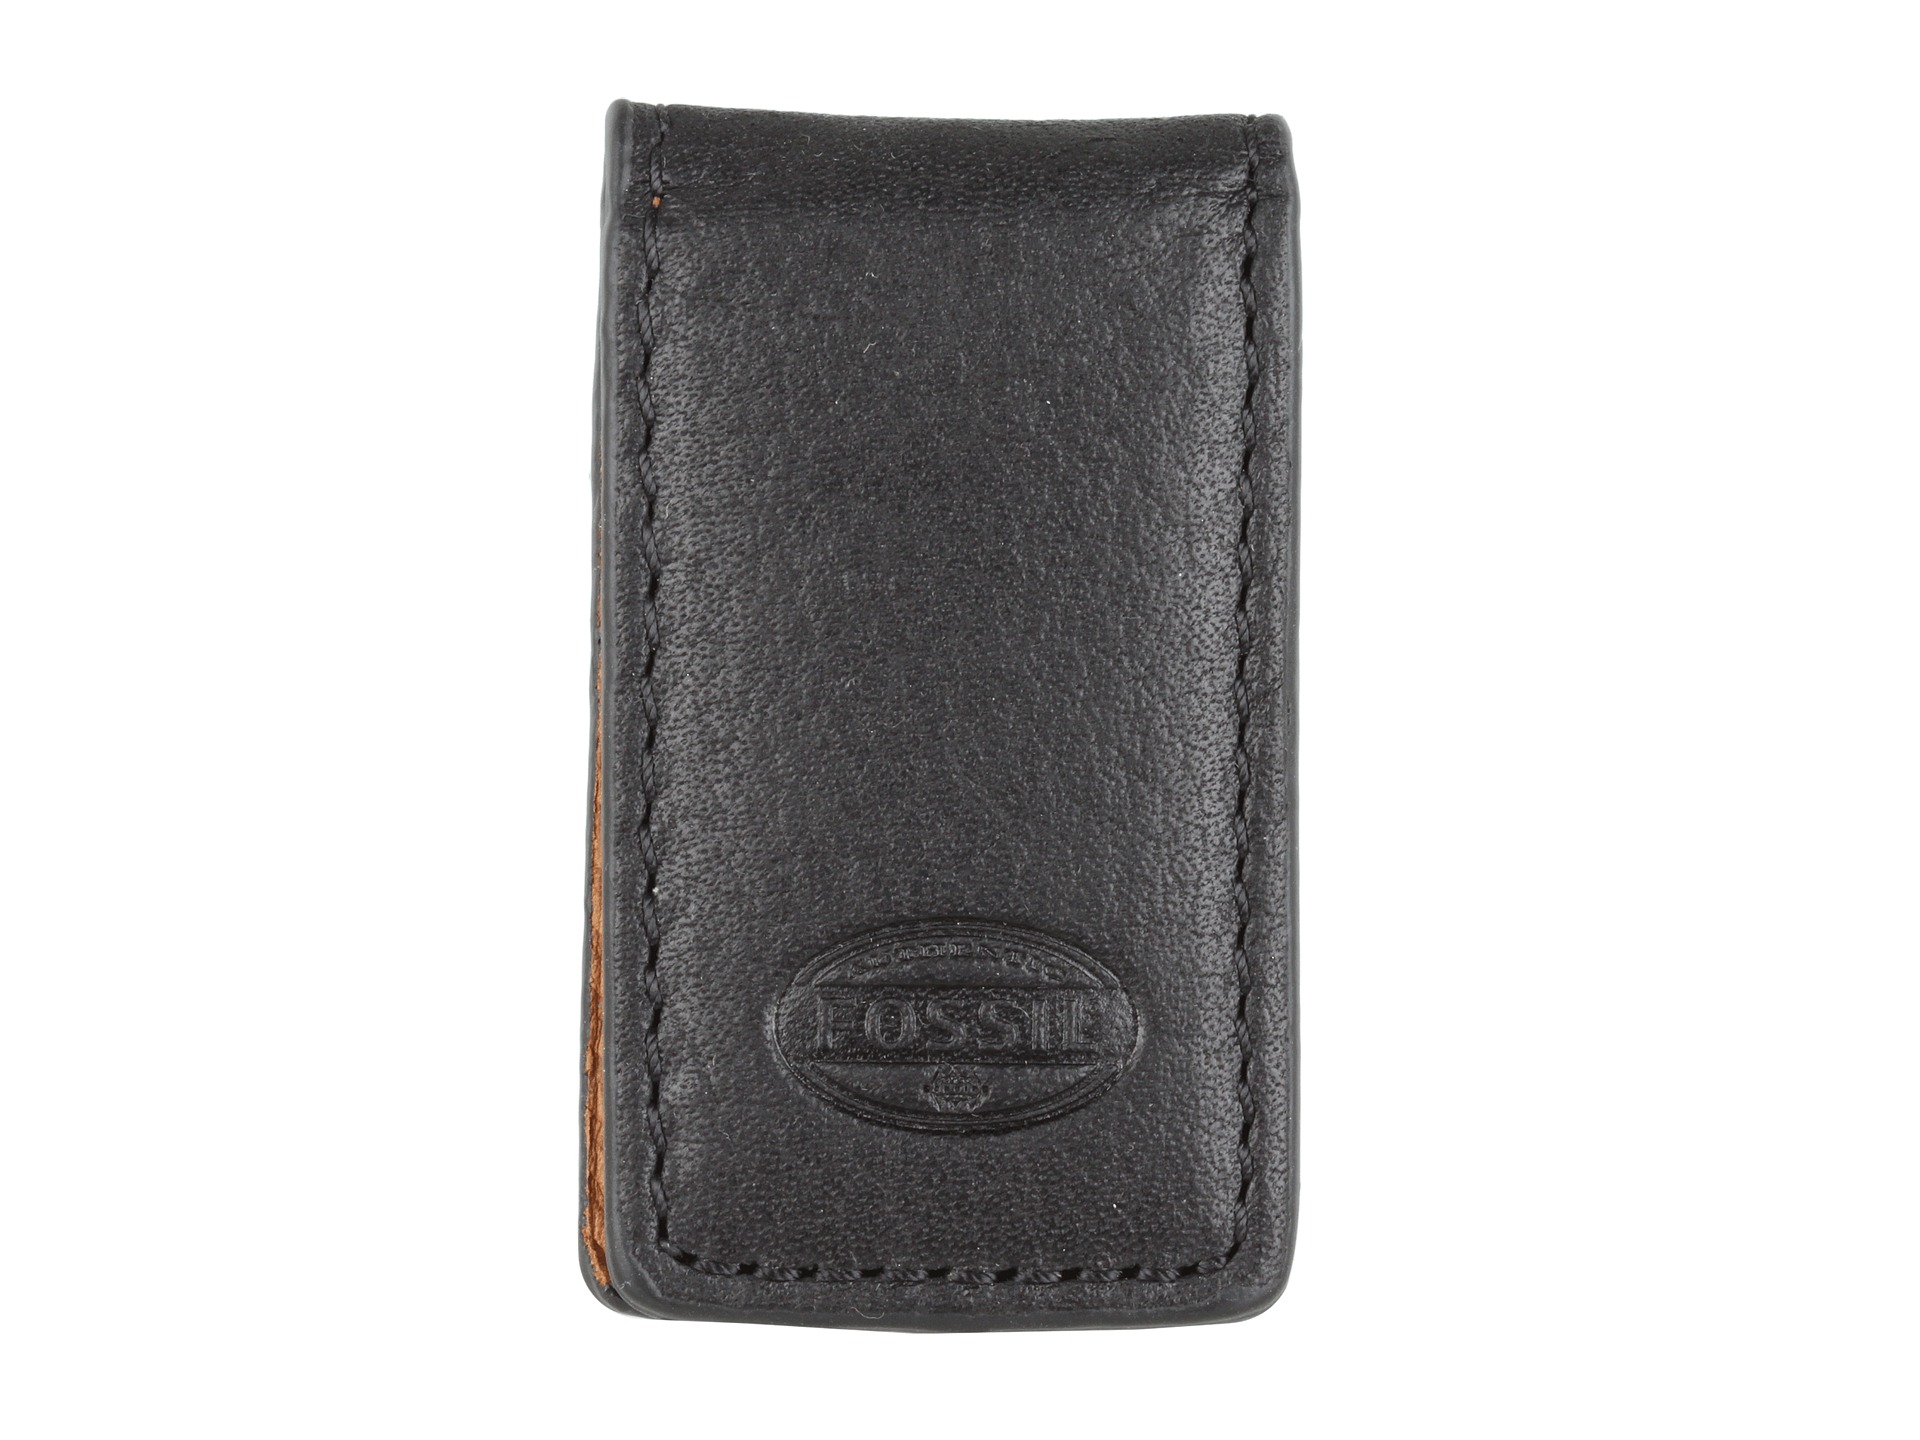 fossil estate leather mag money clip $ 20 00 fossil